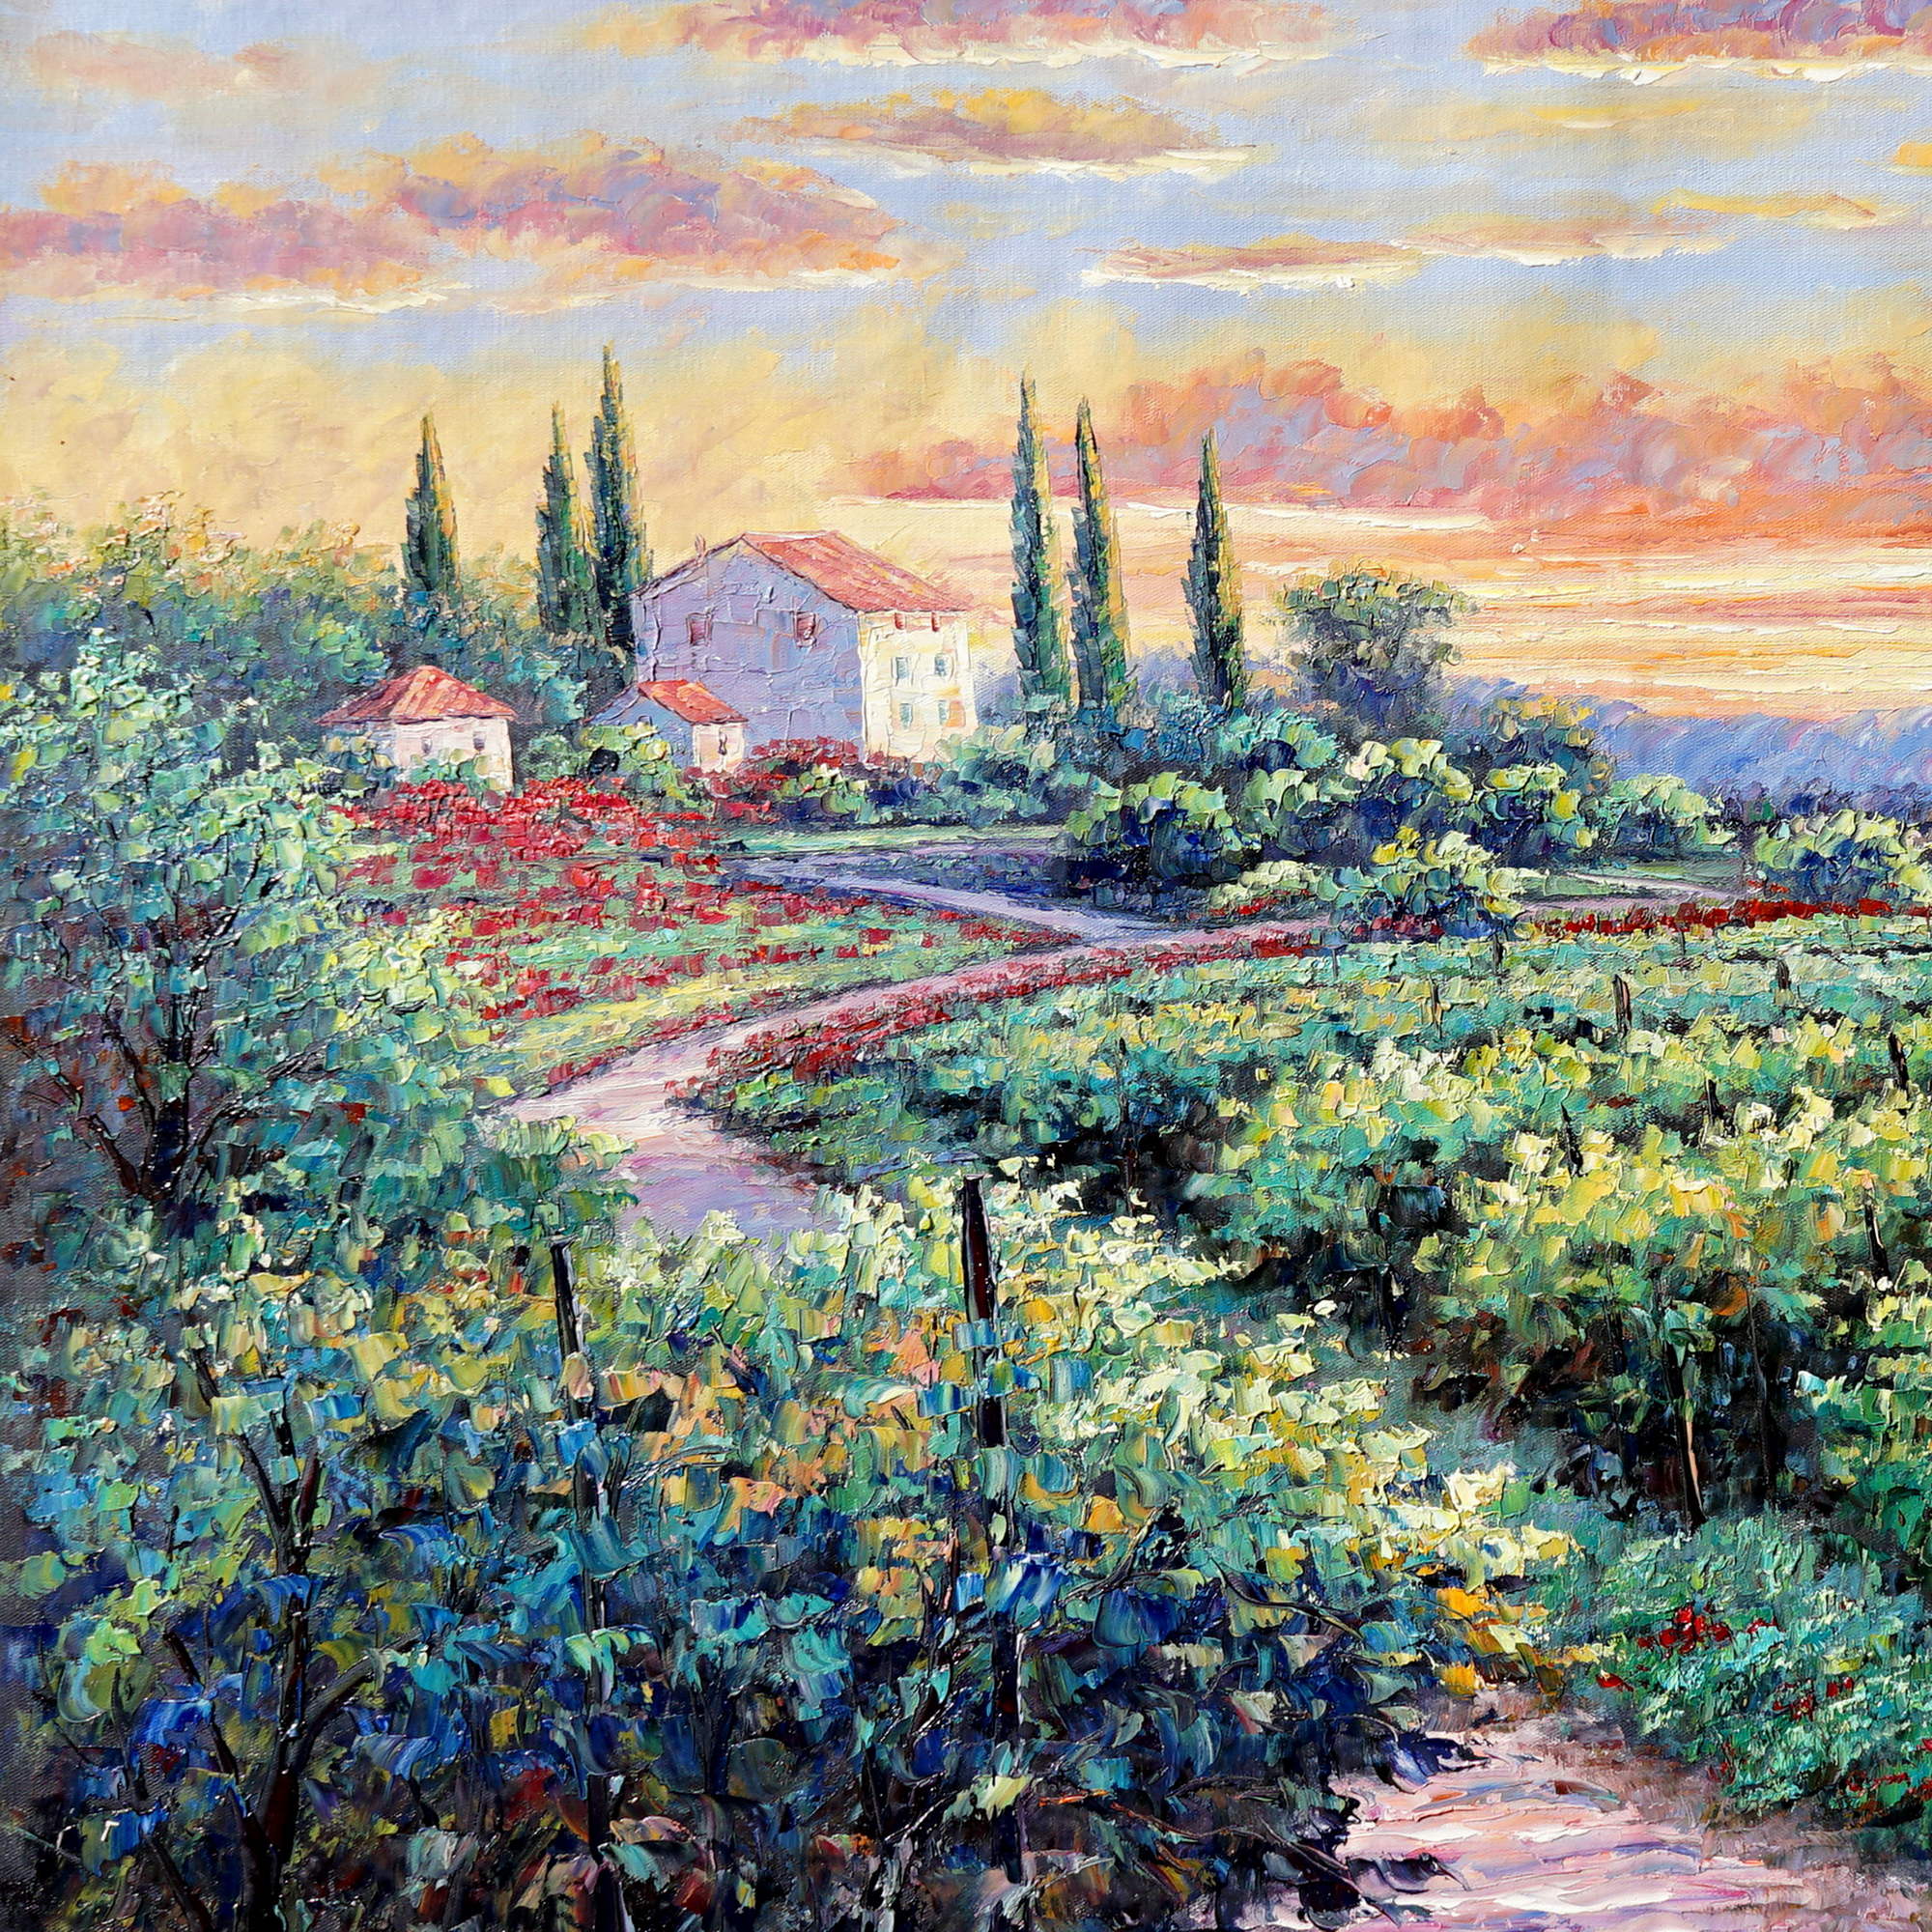 Hand painted Tuscany Landscape at sunset 75x100cm